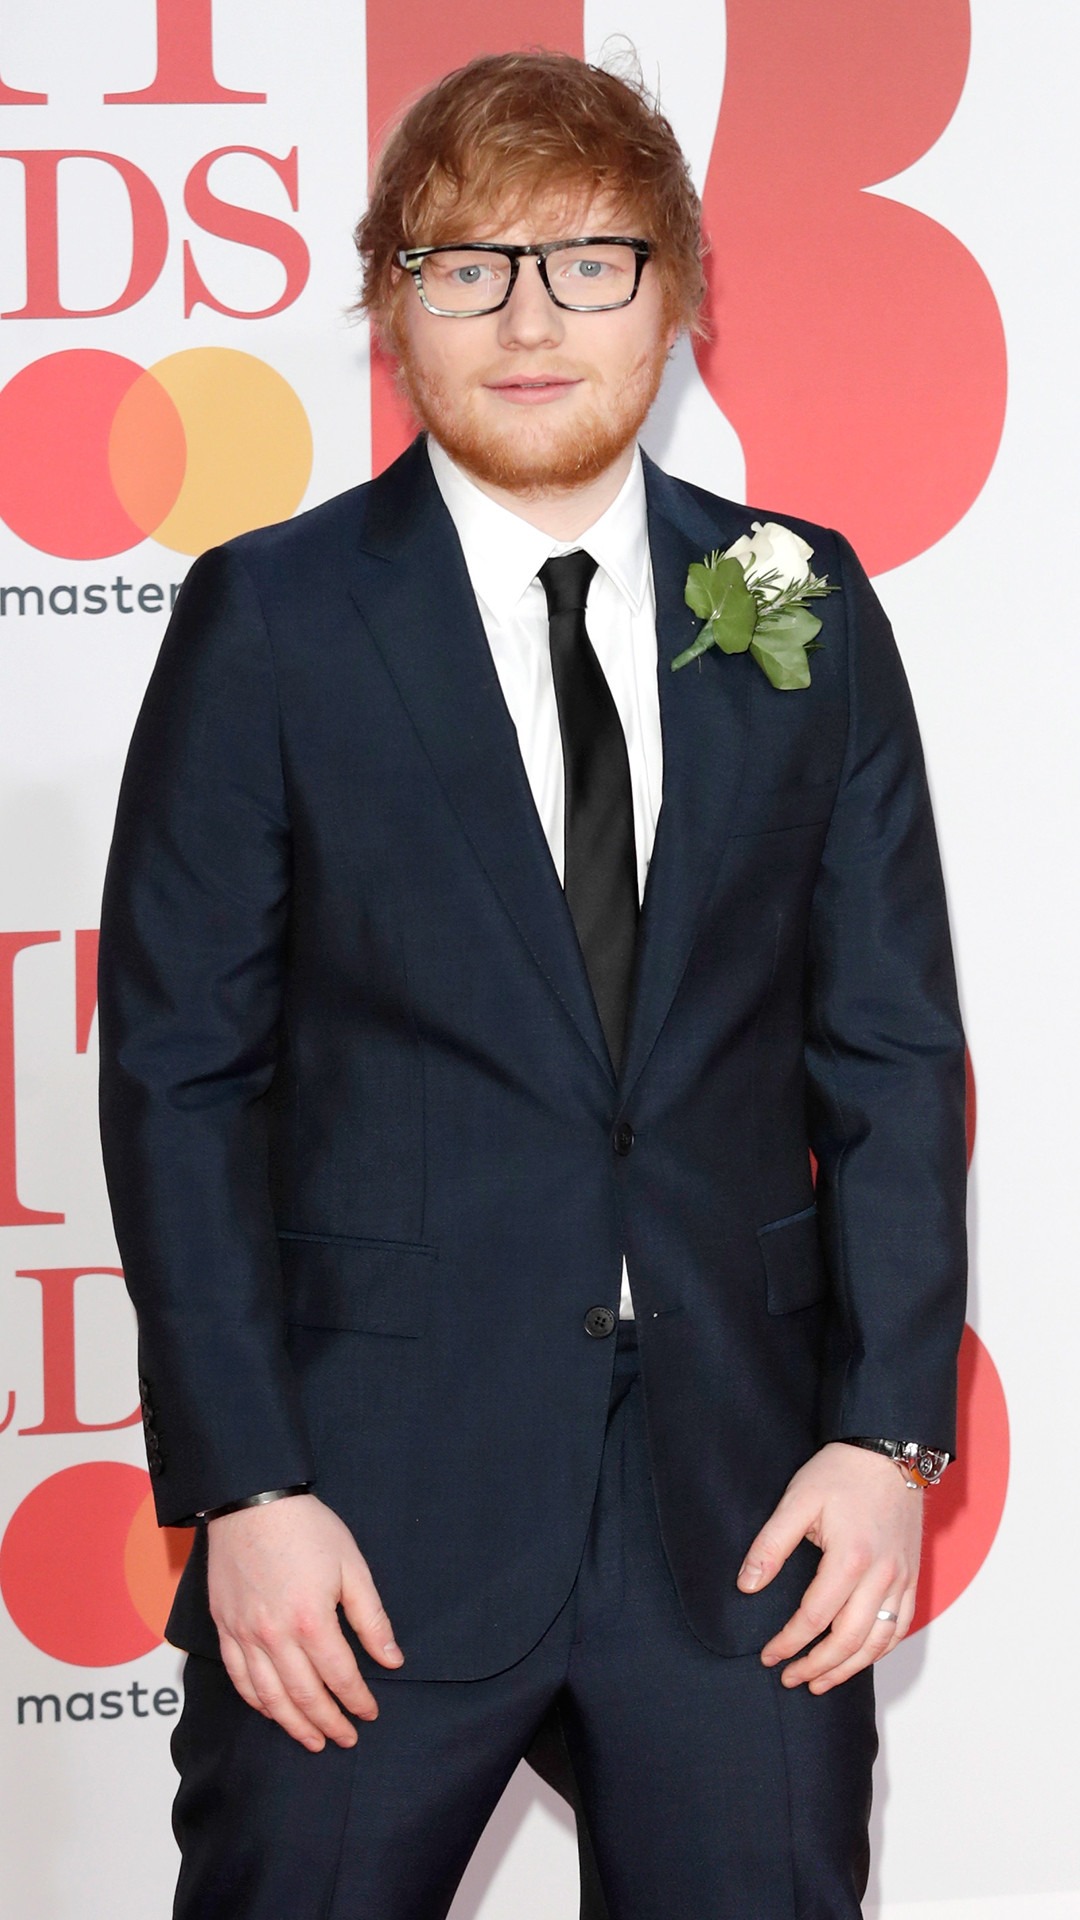 Ed Sheeran Sparks Marriage Speculation With Ring at 2018 BRIT Awards